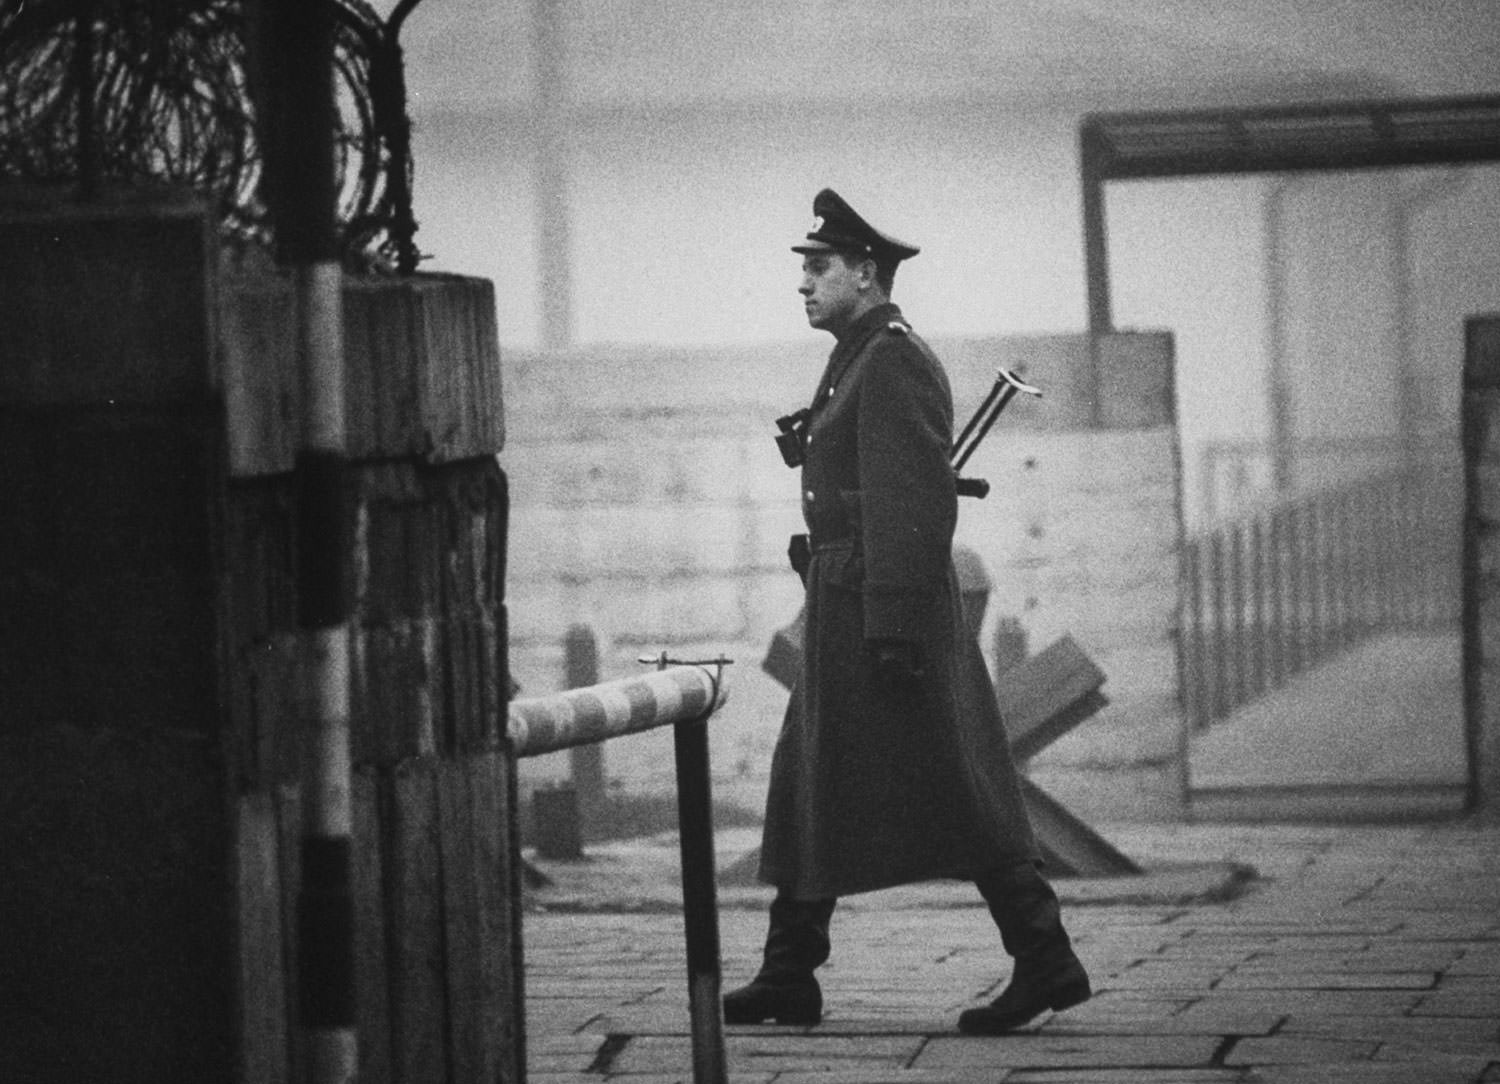 An East German policeman, known as a Volkspolizei or "people's police" — Vopo for short — walks at Checkpoint Charlie between East and West Berlin in October 1962.